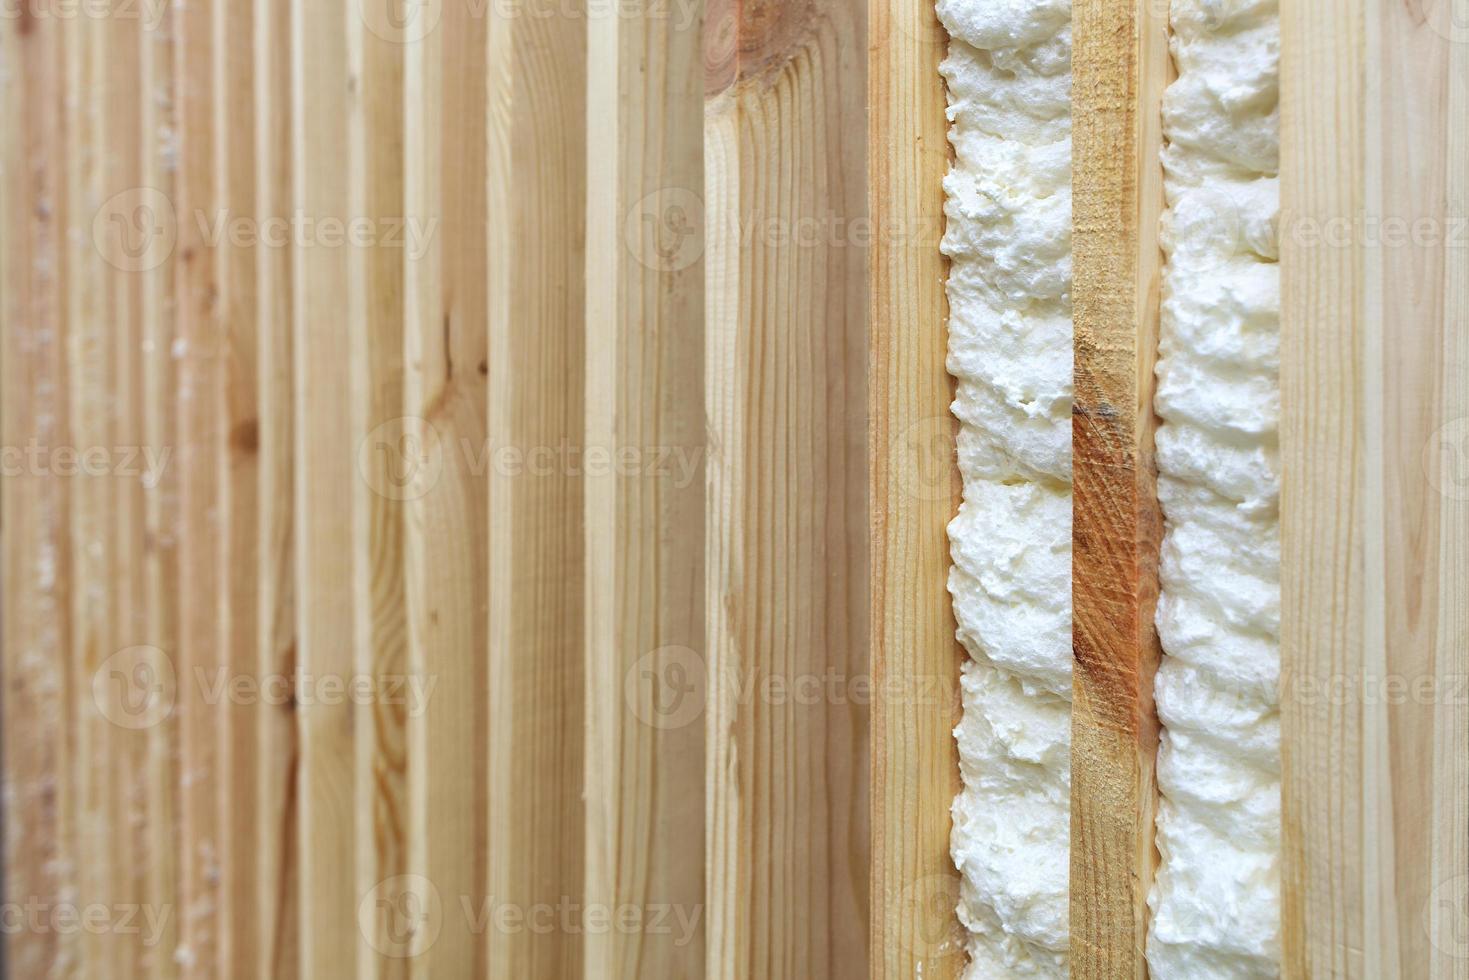 An example of filling the gap between vertical wooden planks with building foam. photo